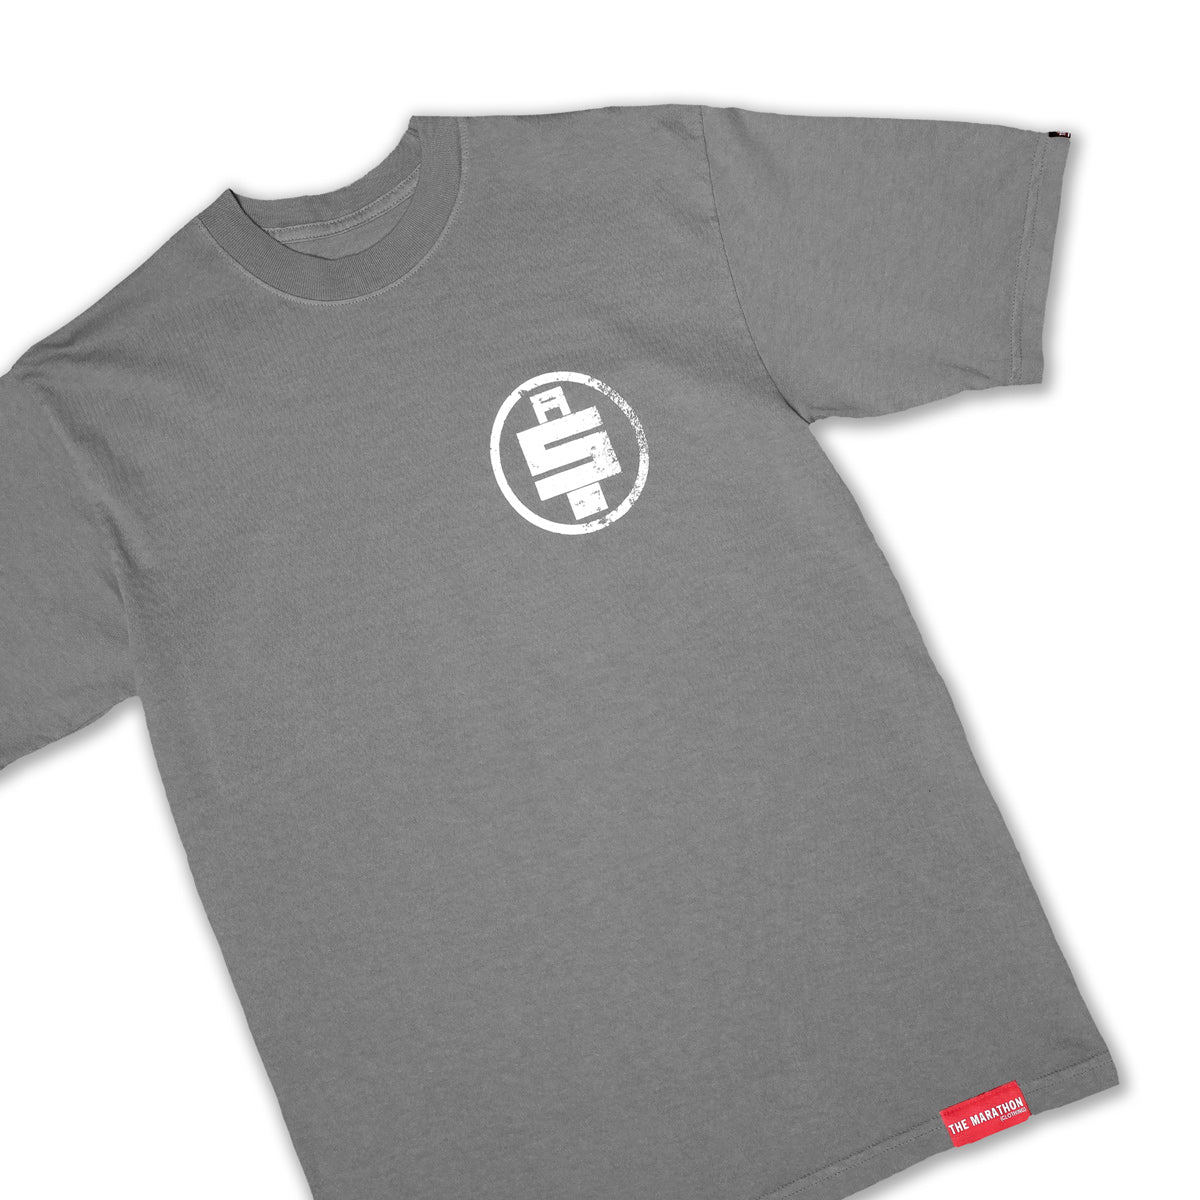 All Money In Vintage T-Shirt - Slate Grey/White - Front Detail